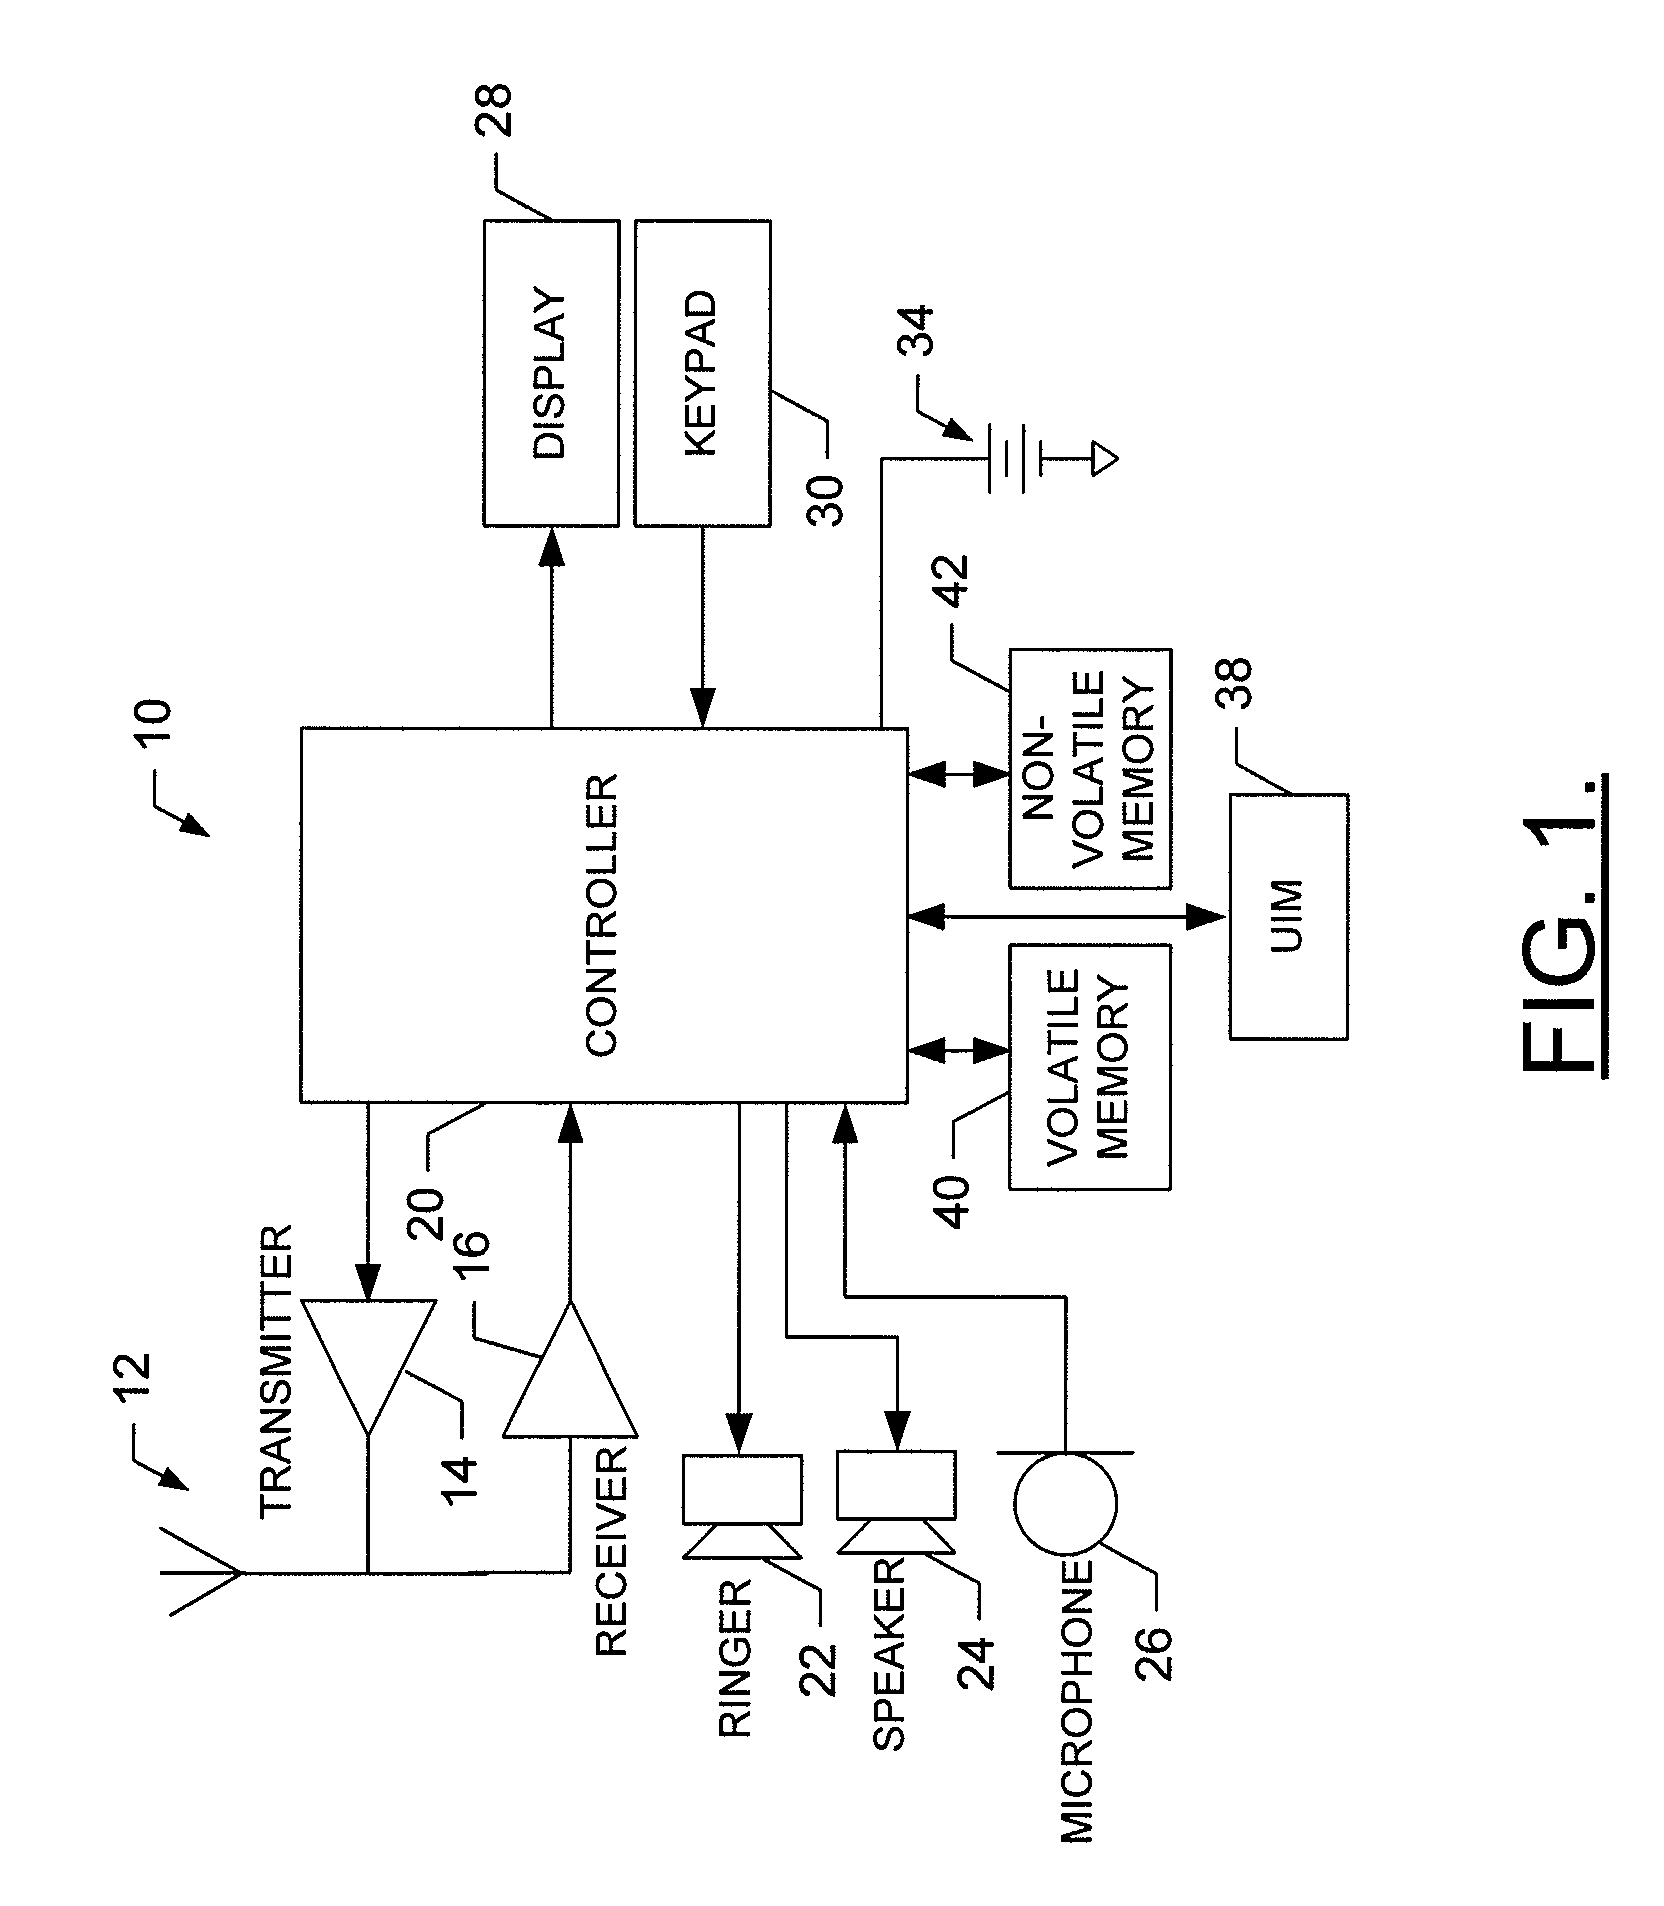 System, method, and computer program product for service and application configuration in a network device